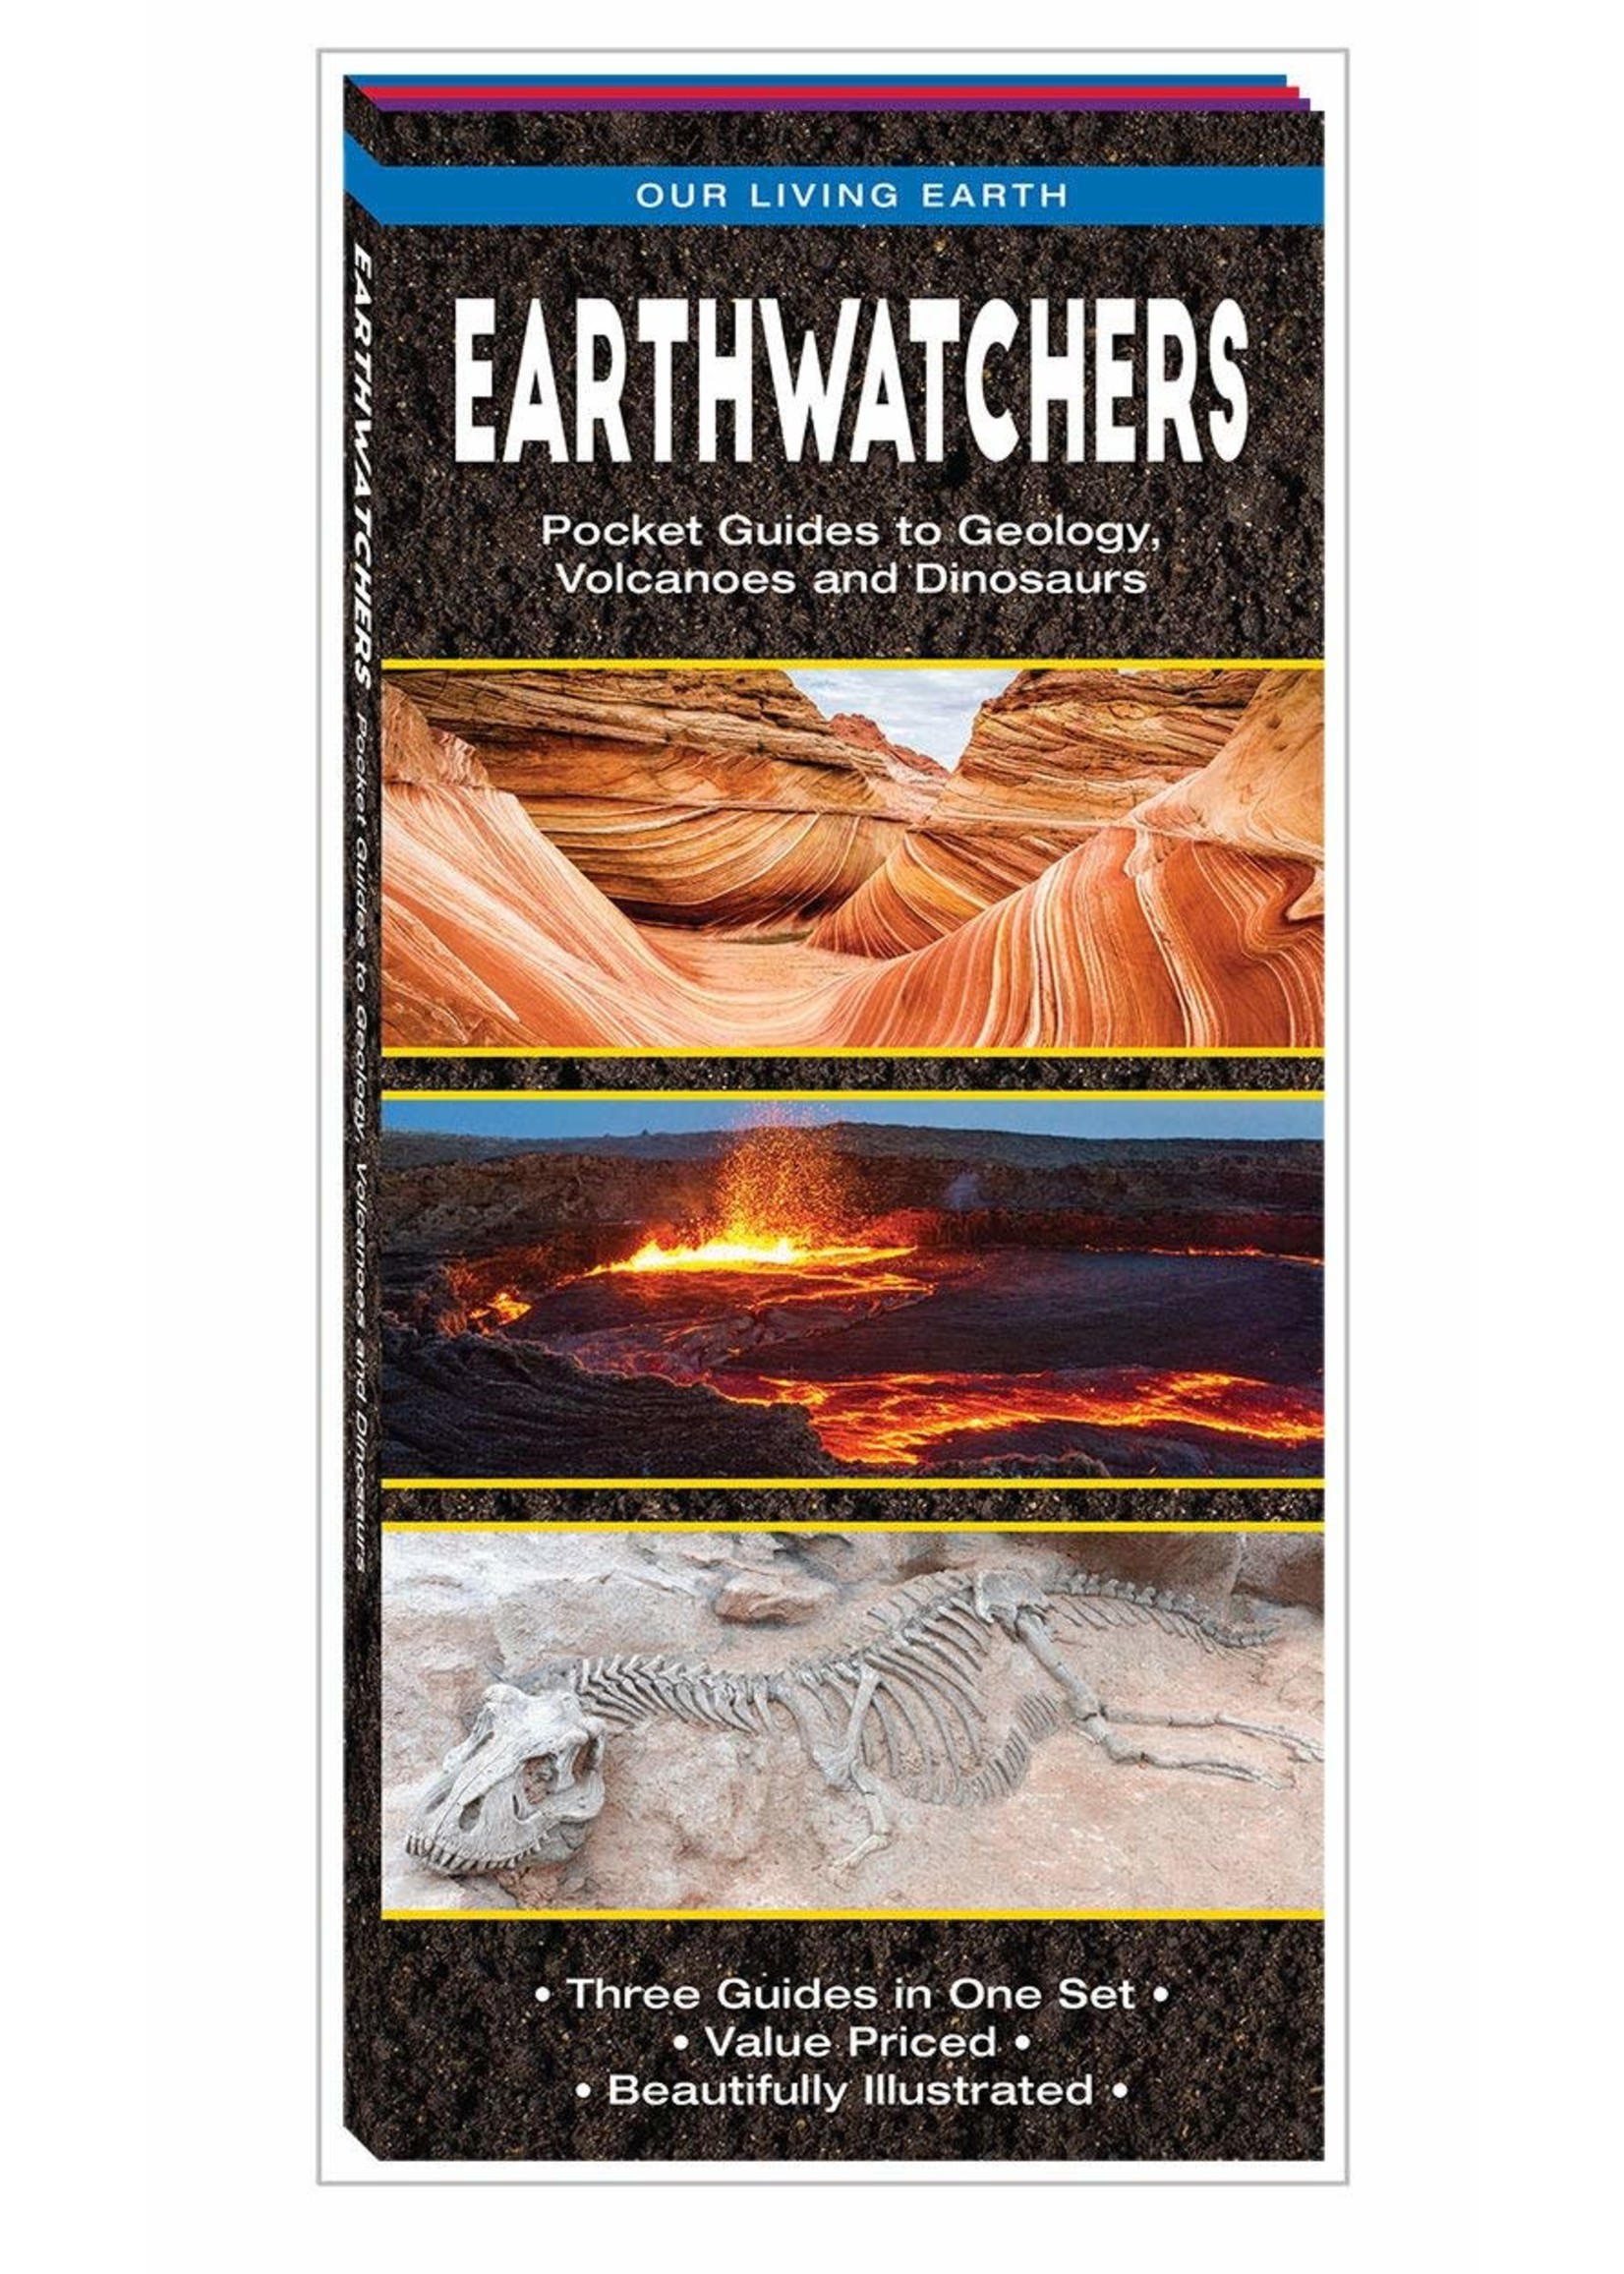 Earthwatchers: Pocket Guides to Geology, Volcanoes, and Dinosaurs